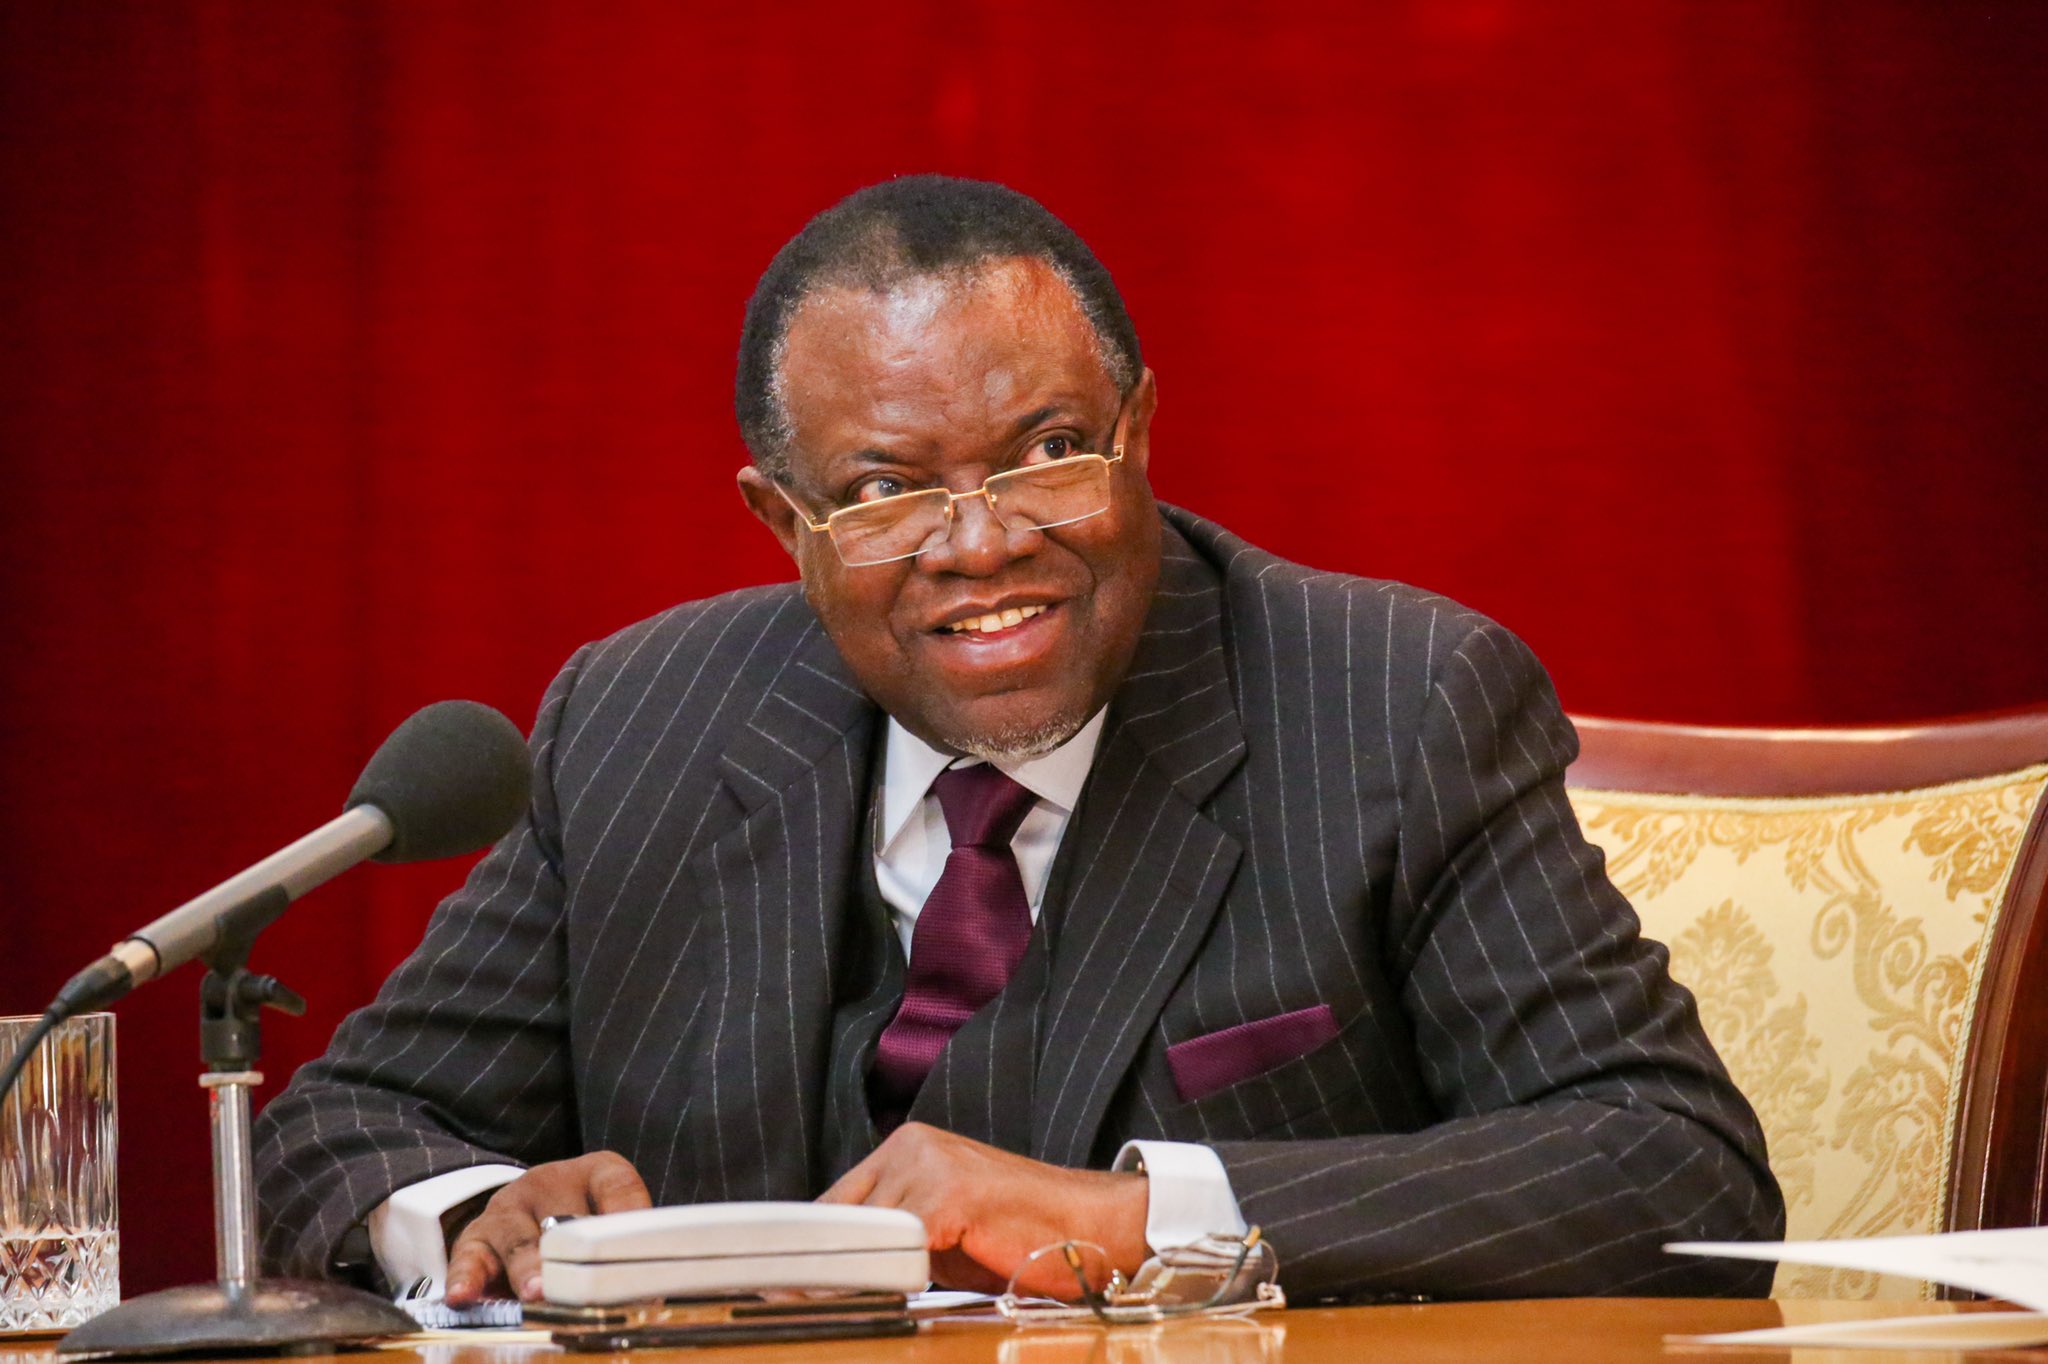 Geingob: Africa could become key energy player